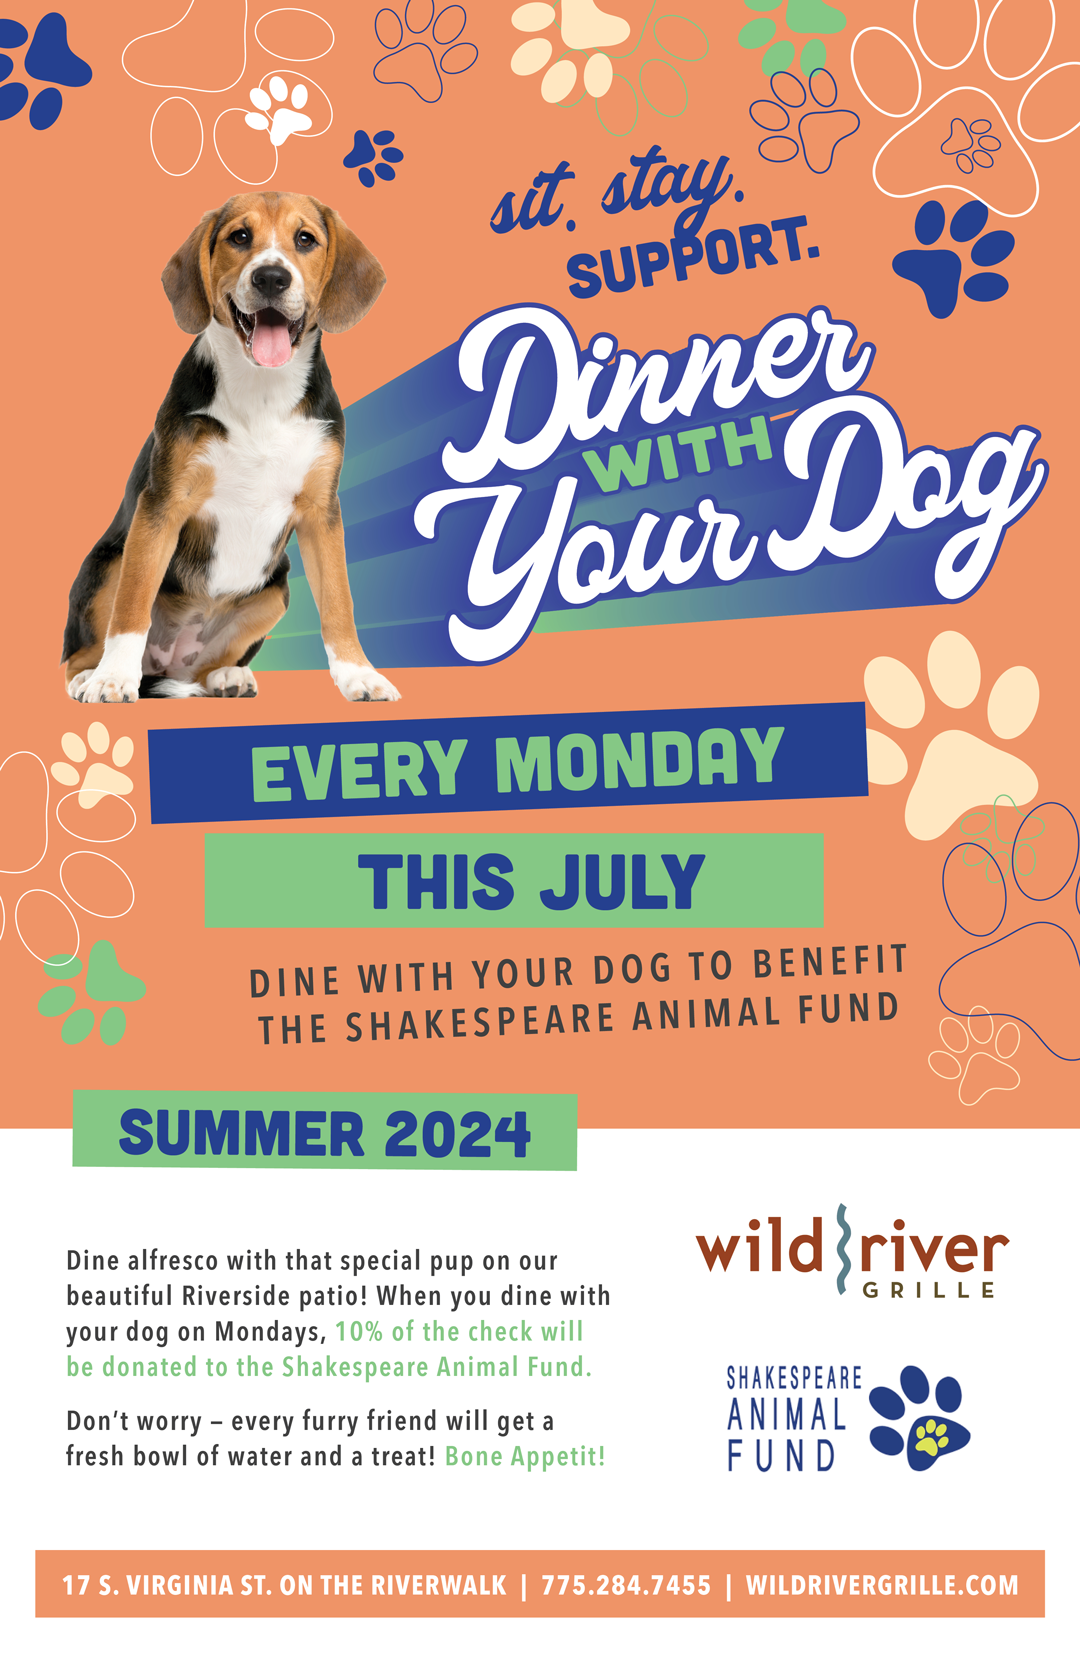 Bring your dog and dine at Wild River Grille on Mondays through July, and 10% of your bill will be donated to local charities!